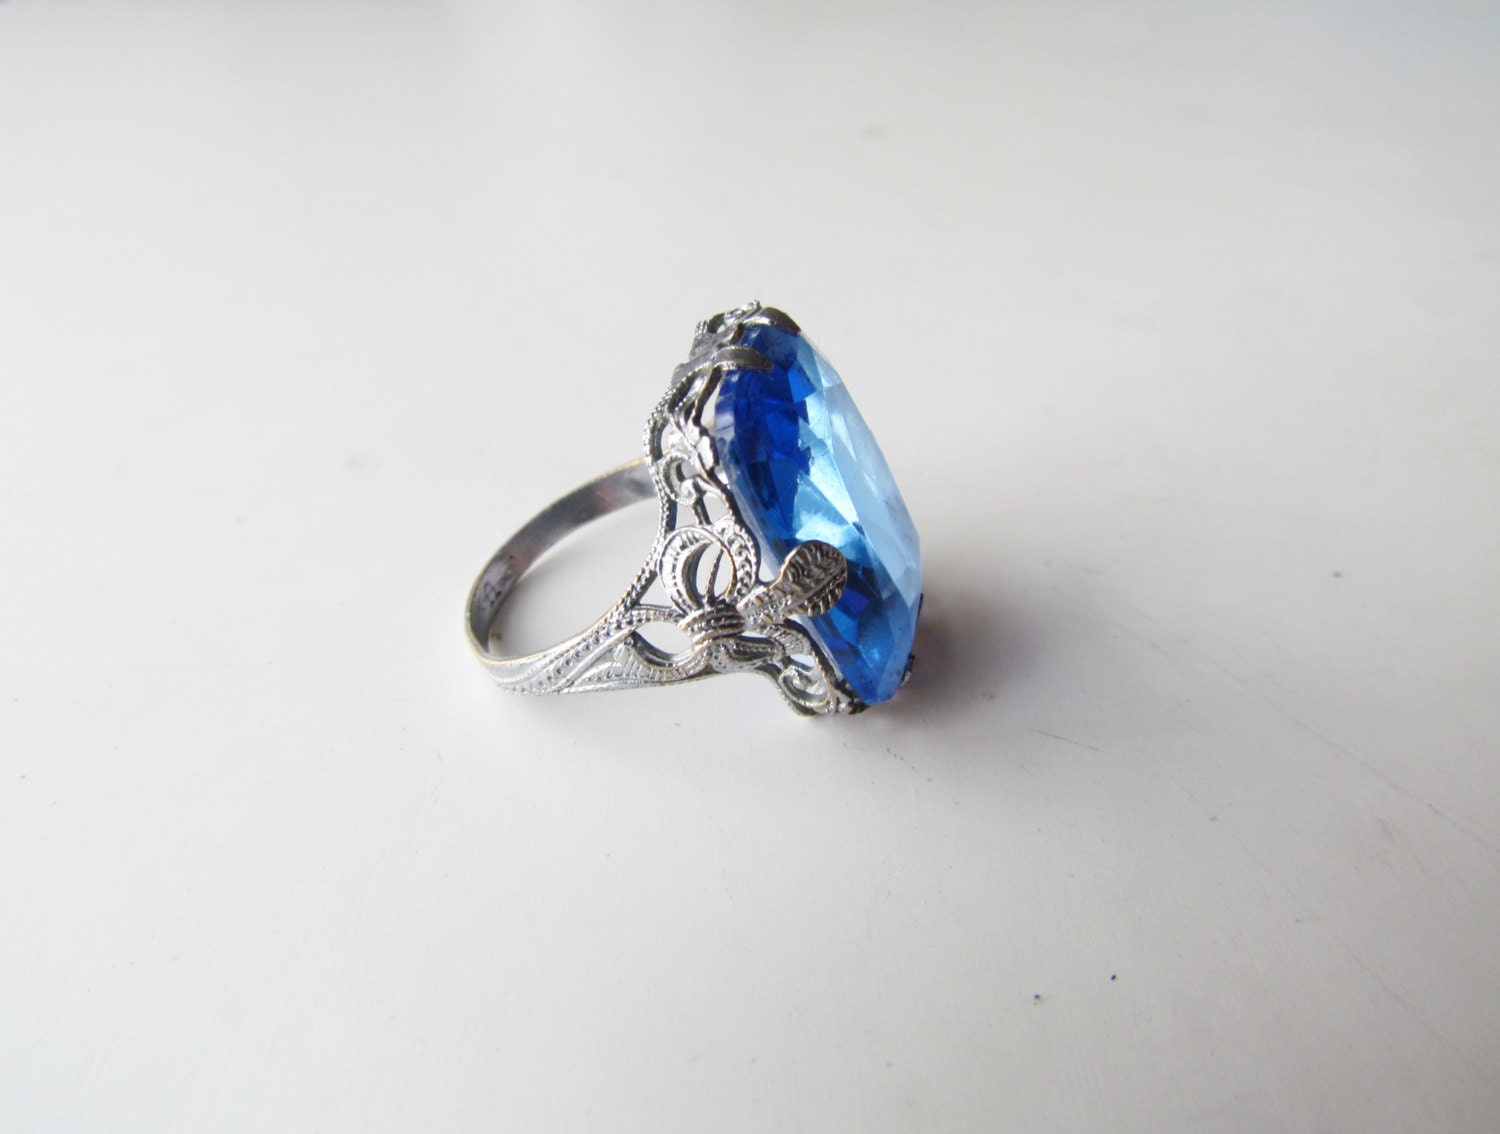 Antique Art Deco Ring With Blue Glass Stone by LUXXORVintage